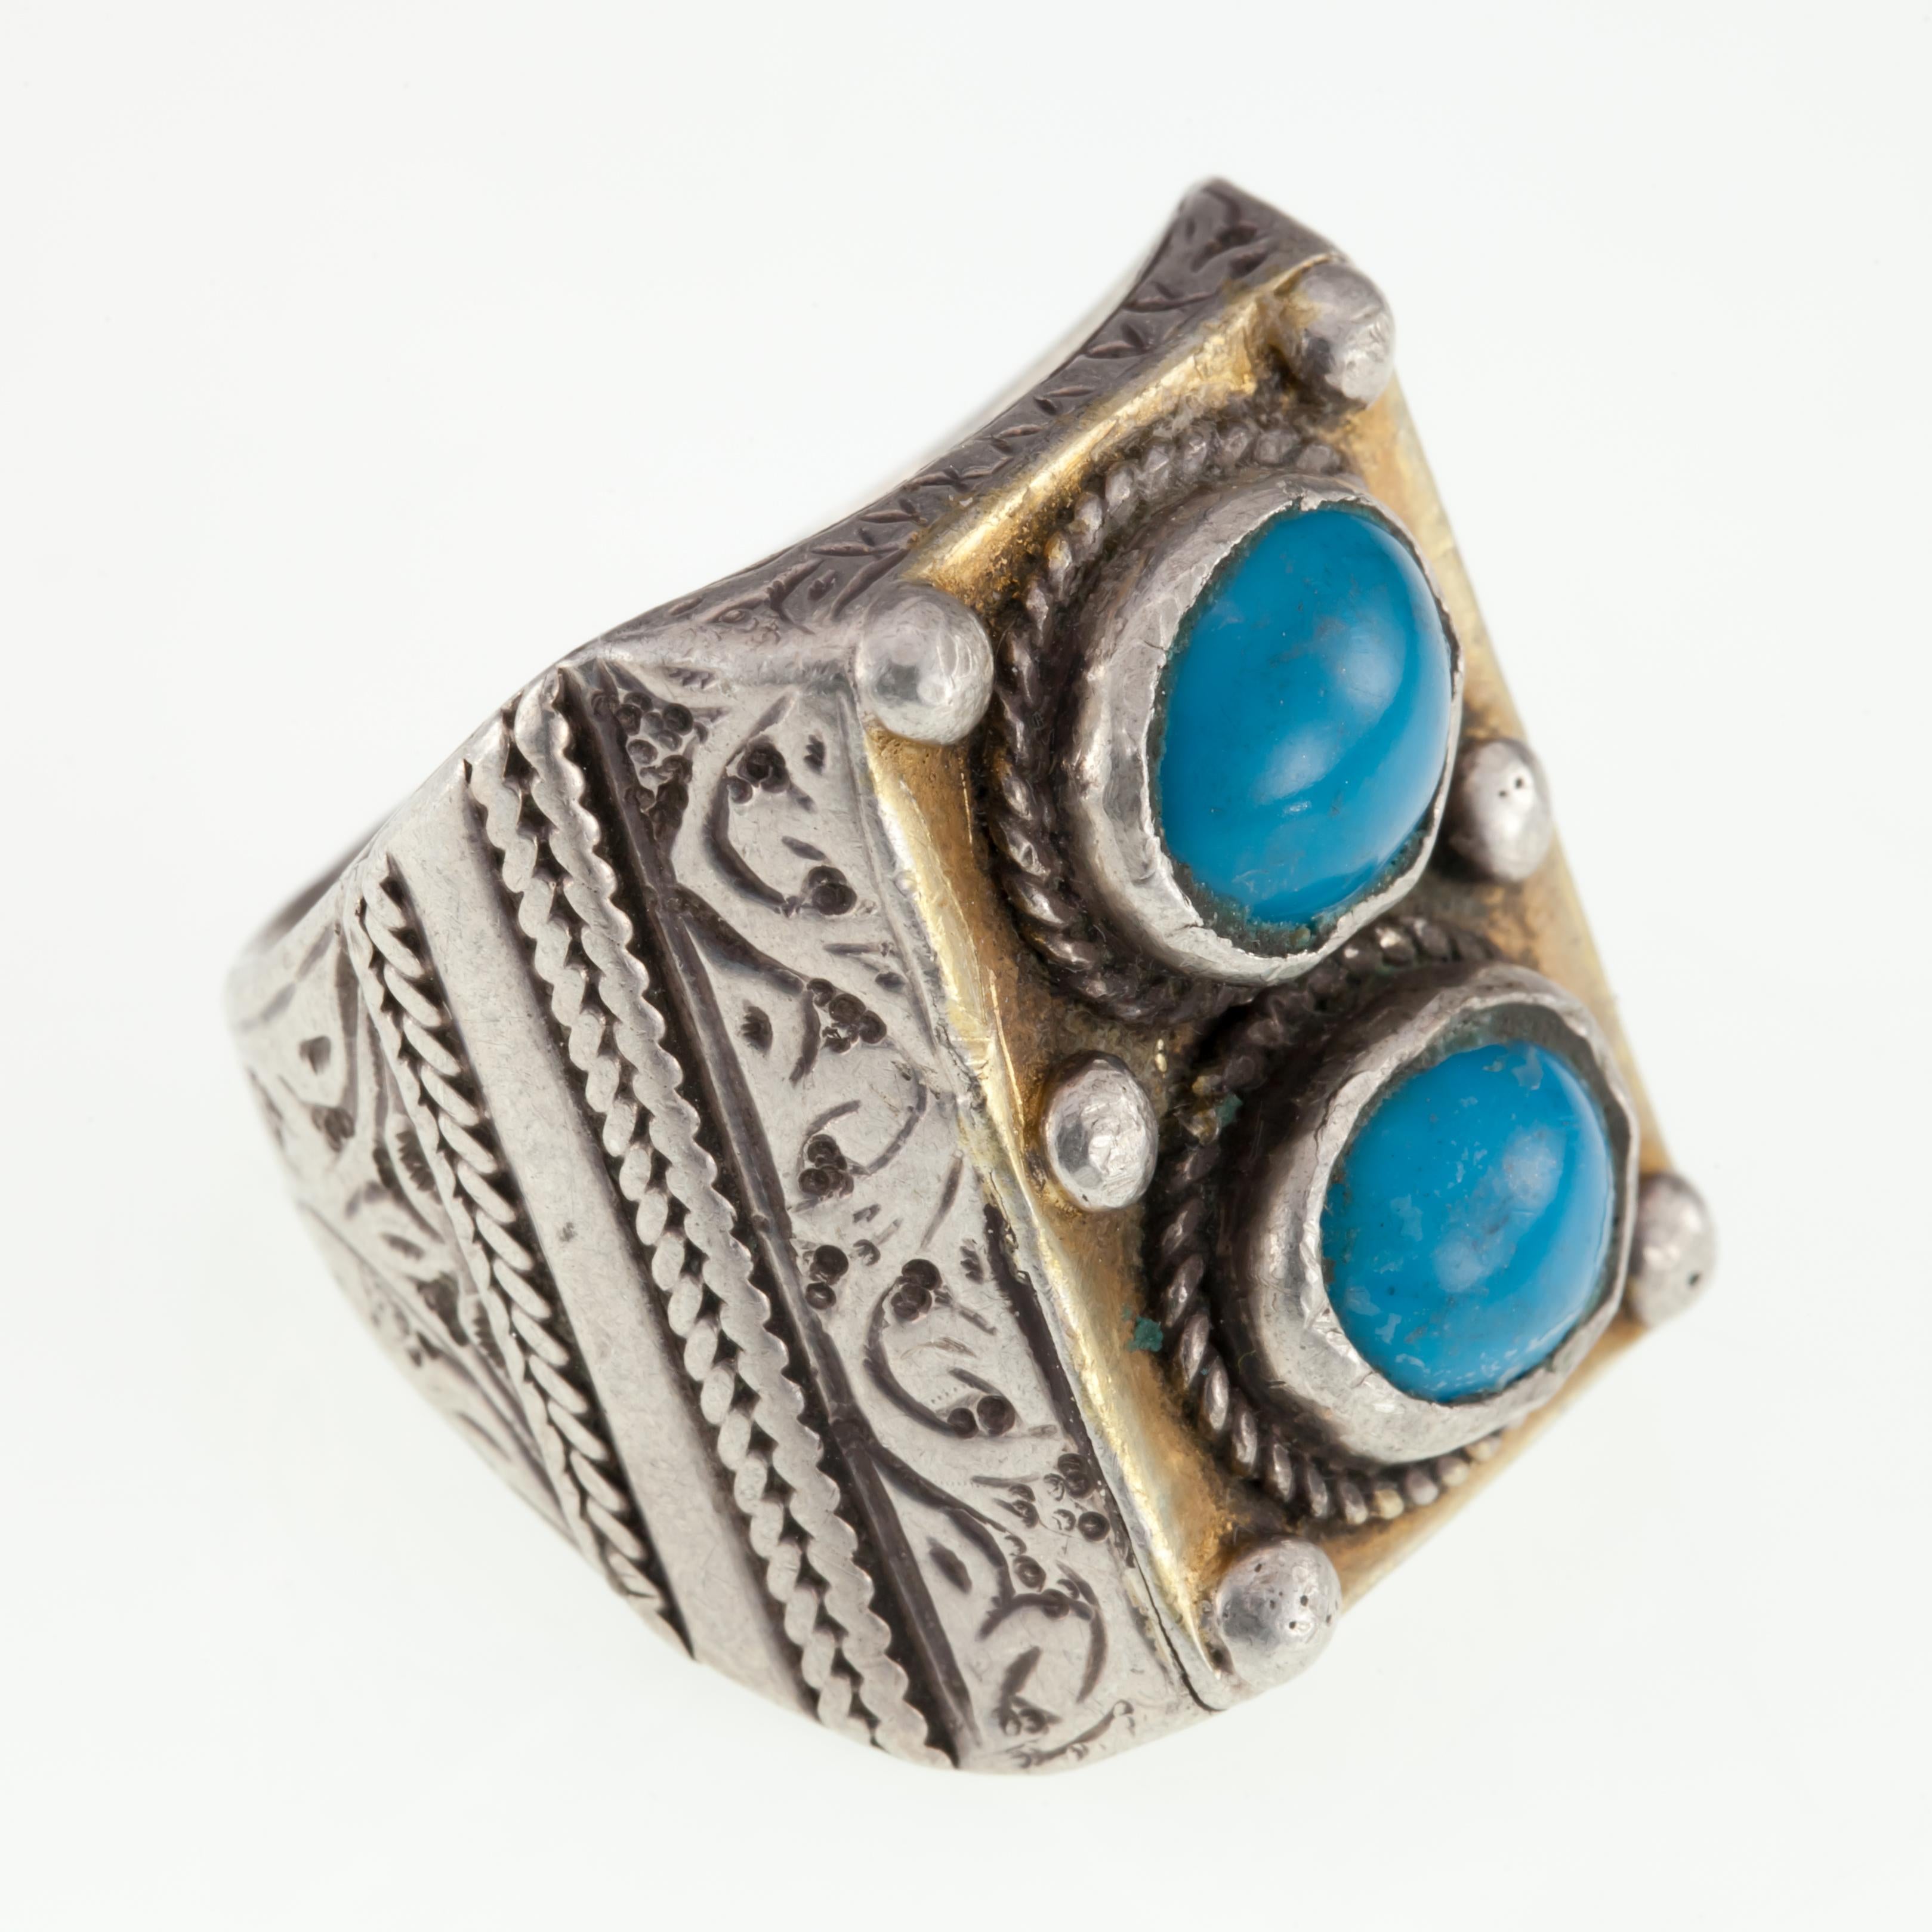 Gorgeous Afghan Turquoise Ring
Features Two Turquoise Cabochons in Brass Silver-Studded Plaque
Size 10.5
Dimensions of Plaque = 24 mm x 17 mm
Total Mass = 17.2 grams